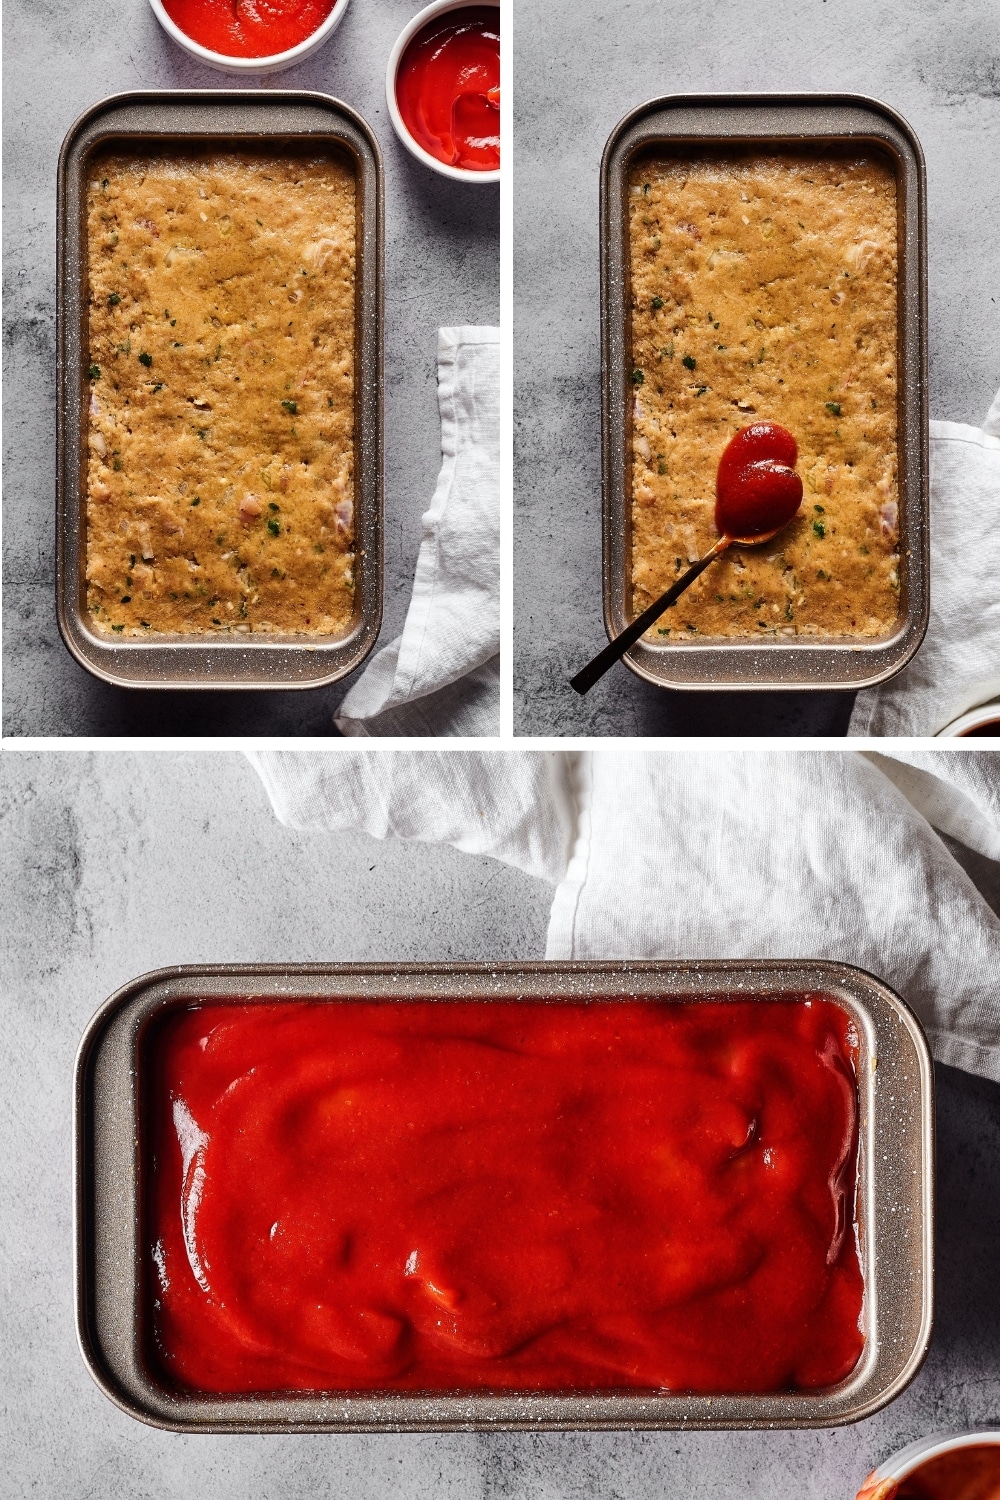 A three split picture: the top left is chicken meatloaf in a baking dish with two small bowls of catch-up glaze behind it. The top right picture is a baking dish filled with chicken meatloaf with a spoon spreading the glaze on it, and the bottom picture is a baking dish filled with chicken meatloaf covered in ketchup glaze.